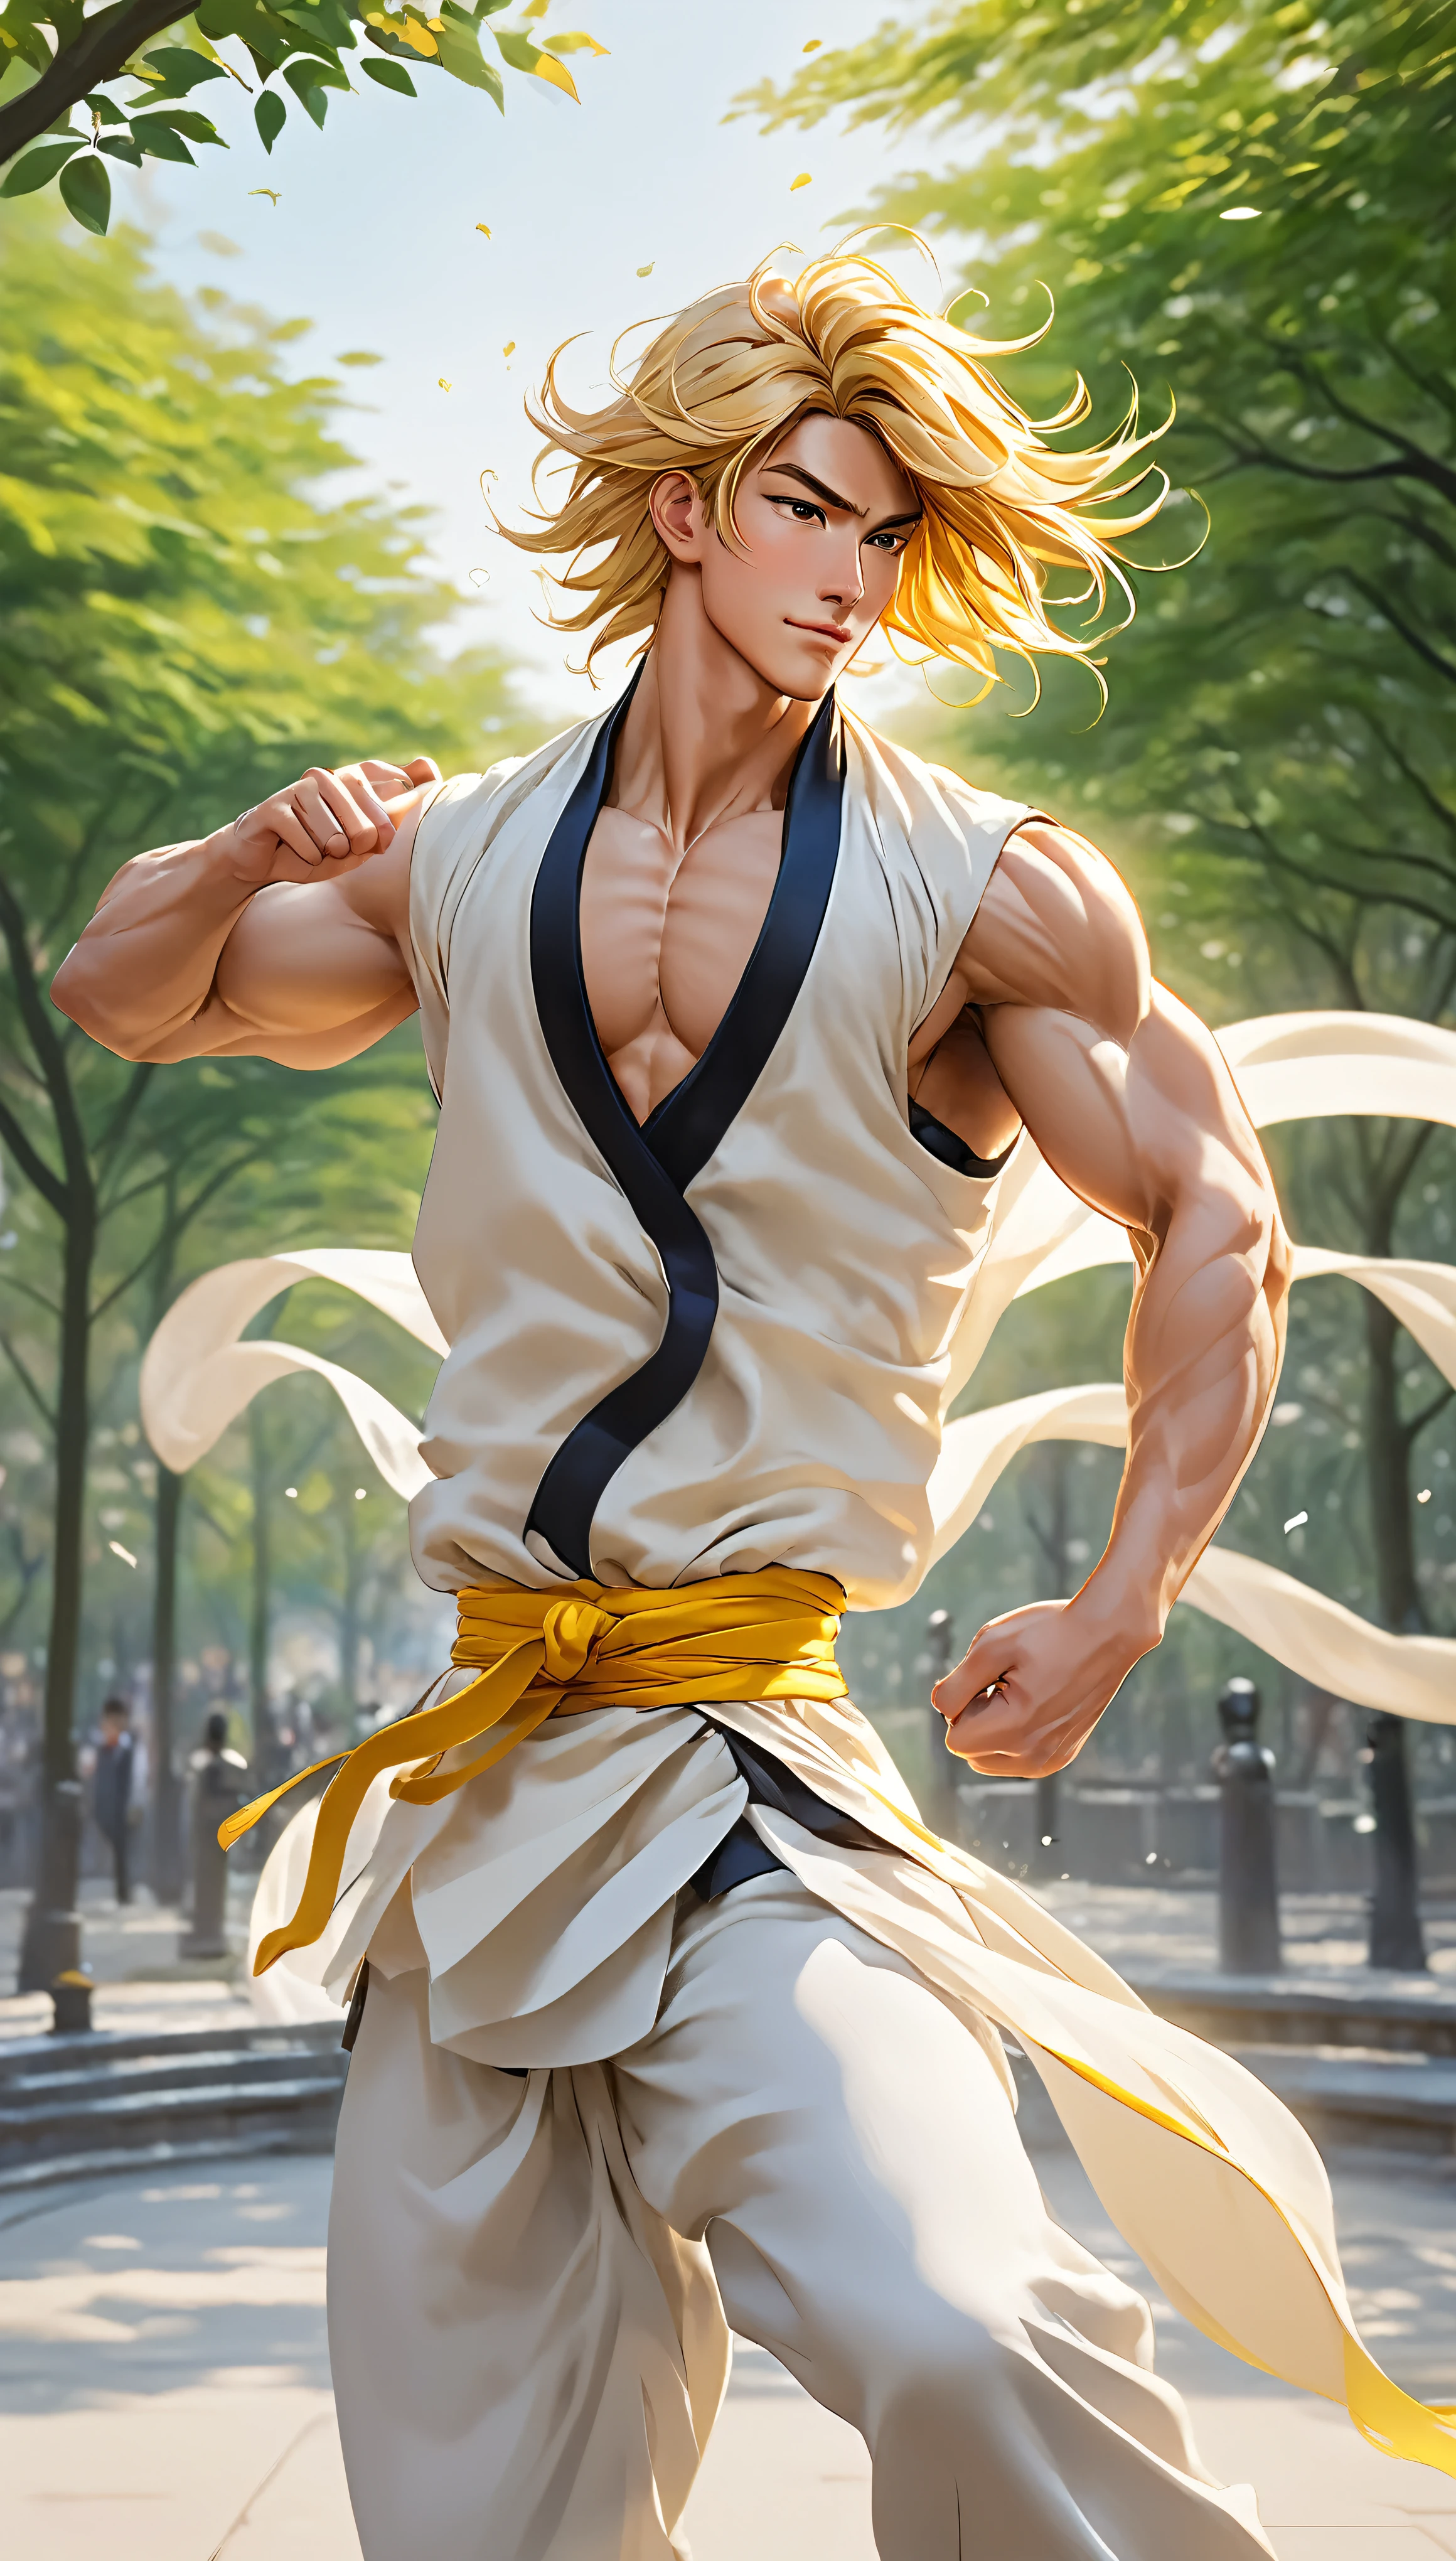 Character anime man standing in the park: At the heart of a calm, white-based environment、A lively young cartoon man standing in an impressive pose、Its strength radiates through the lines and contours of its muscular form.。Long golden hair fluttering in the wind、It frames a square jaw and high cheekbones.。The design sketch、Alluding to the intricate details of his original characters、It emphasizes random poses that evoke a sense of fluidity and strength.。 Dressed in a costume that combines the aesthetics of modern martial artists and parkour enthusiasts